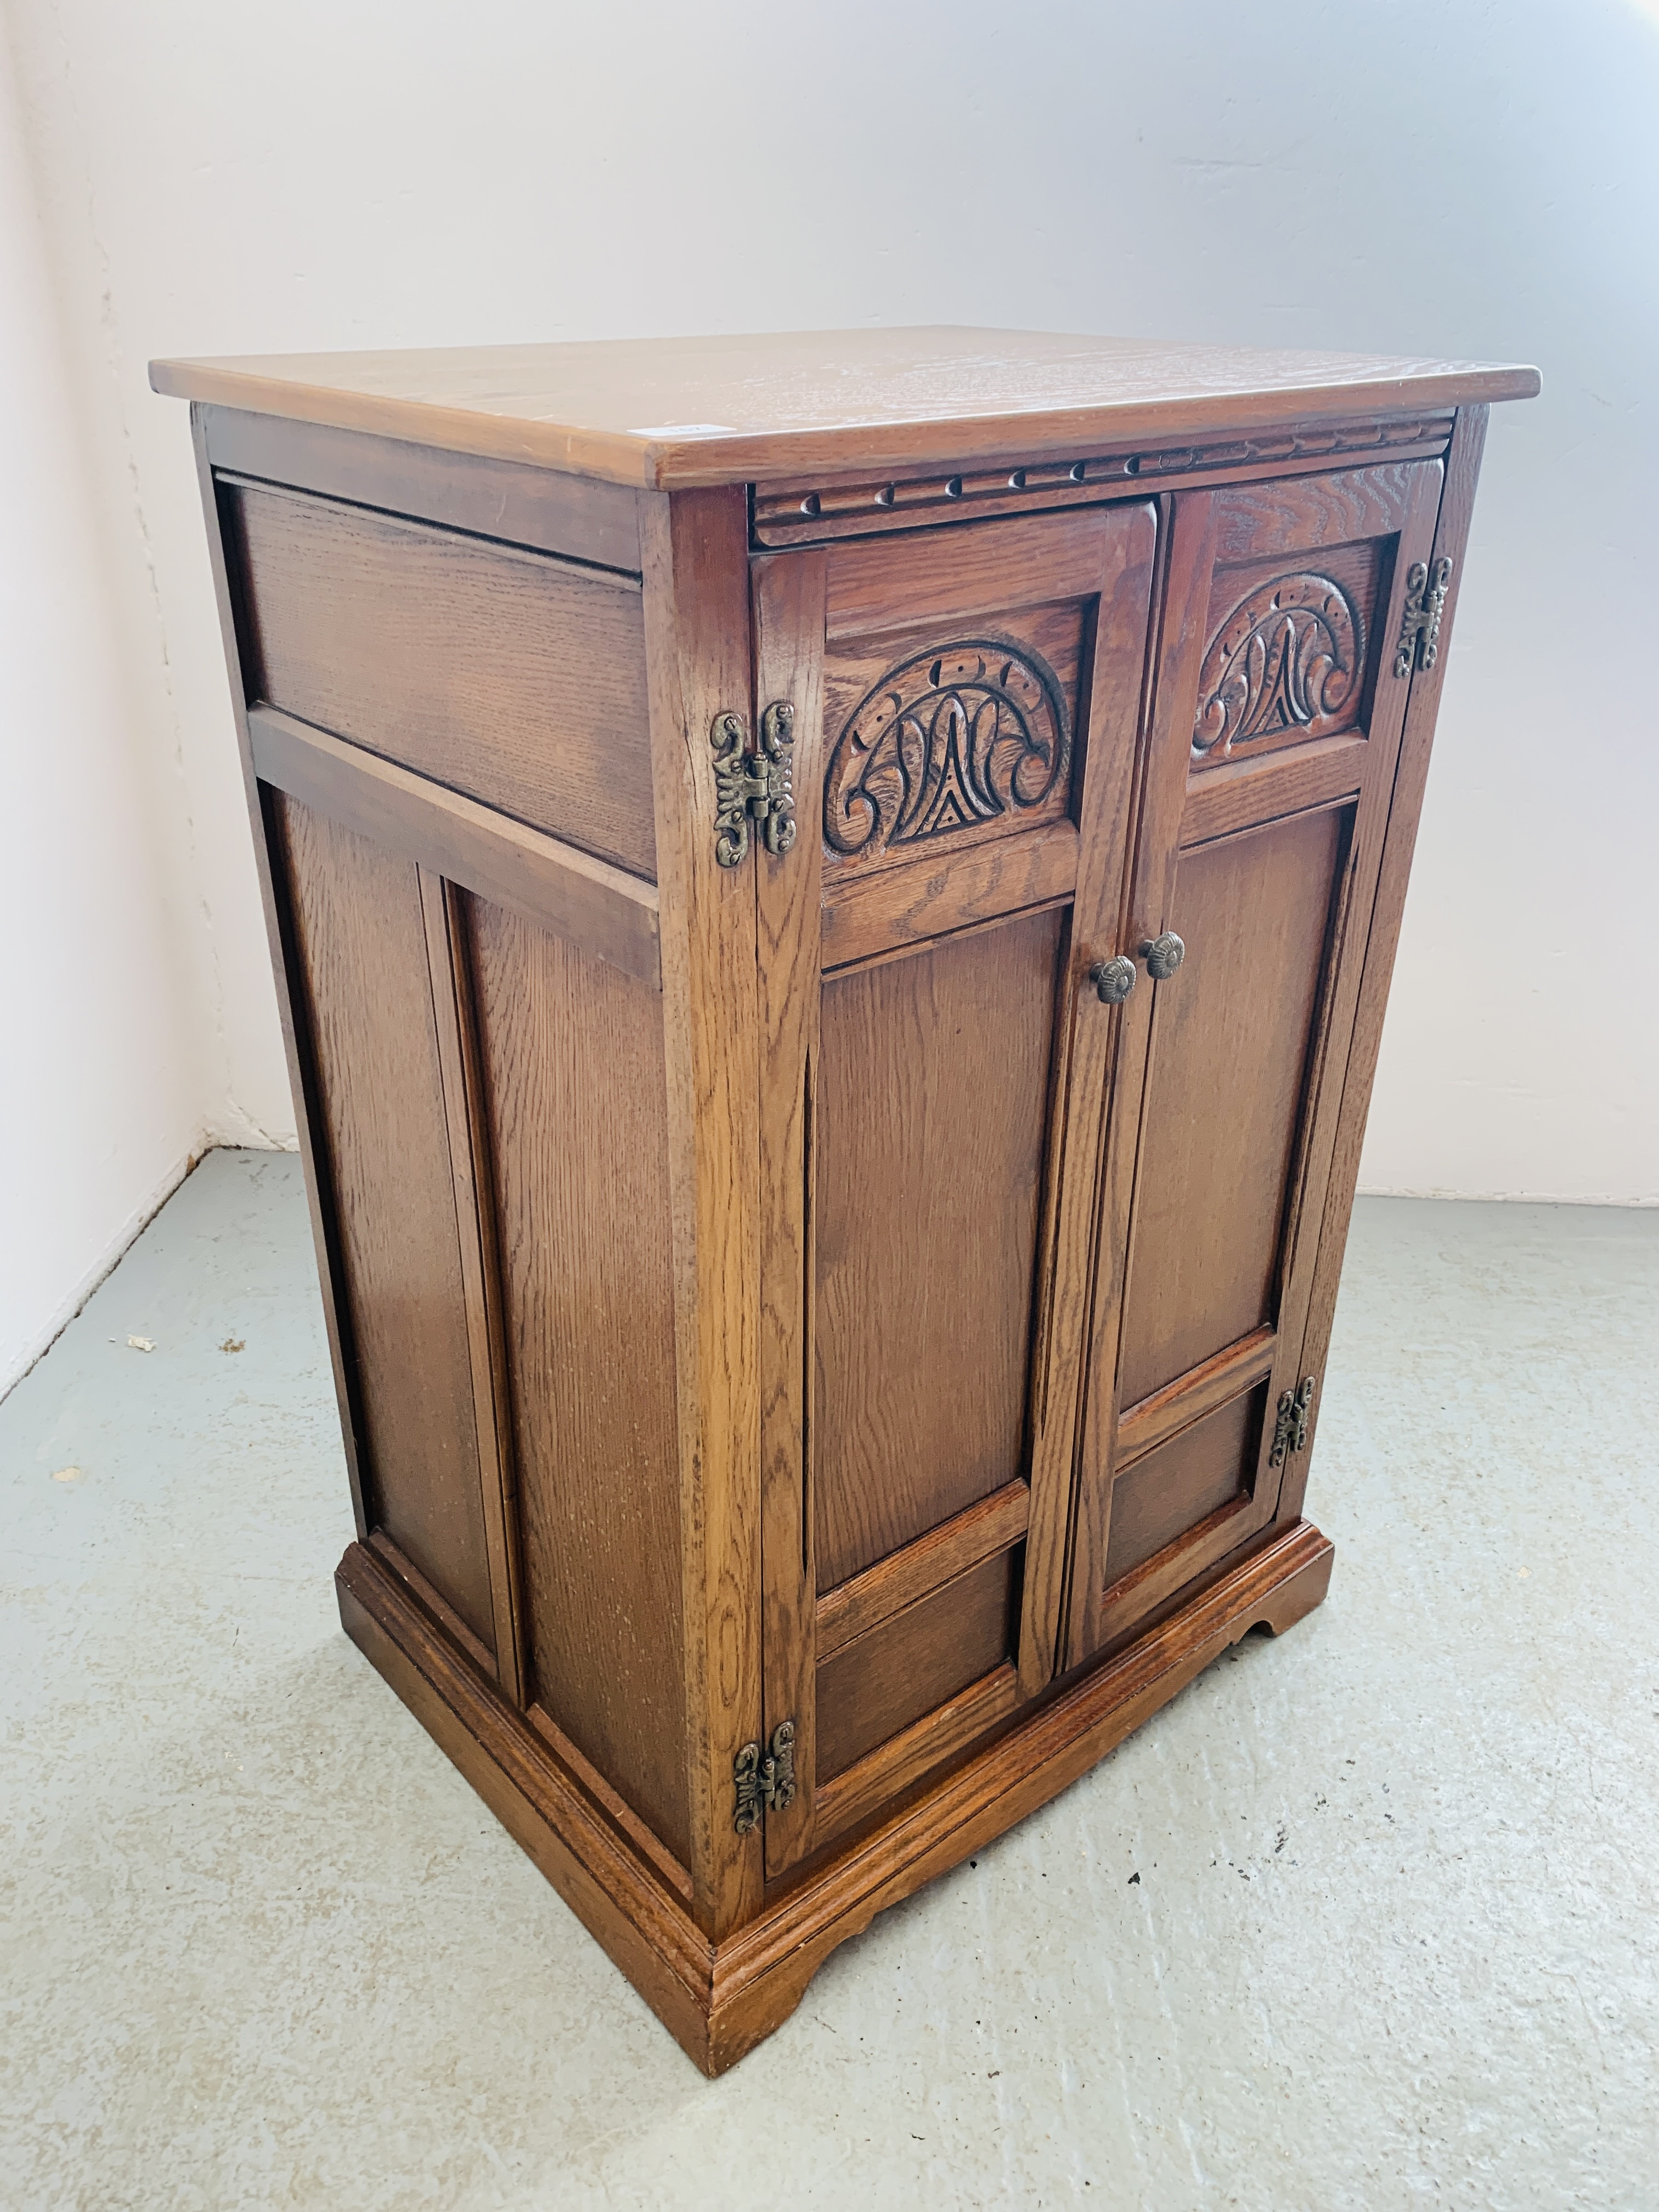 AN OLD CHARM STYLE TWO DOOR CABINET WITH SHELVED INTERIOR AND HINGED TOP - W 62CM. D 49CM. H 94CM. - Image 5 of 7